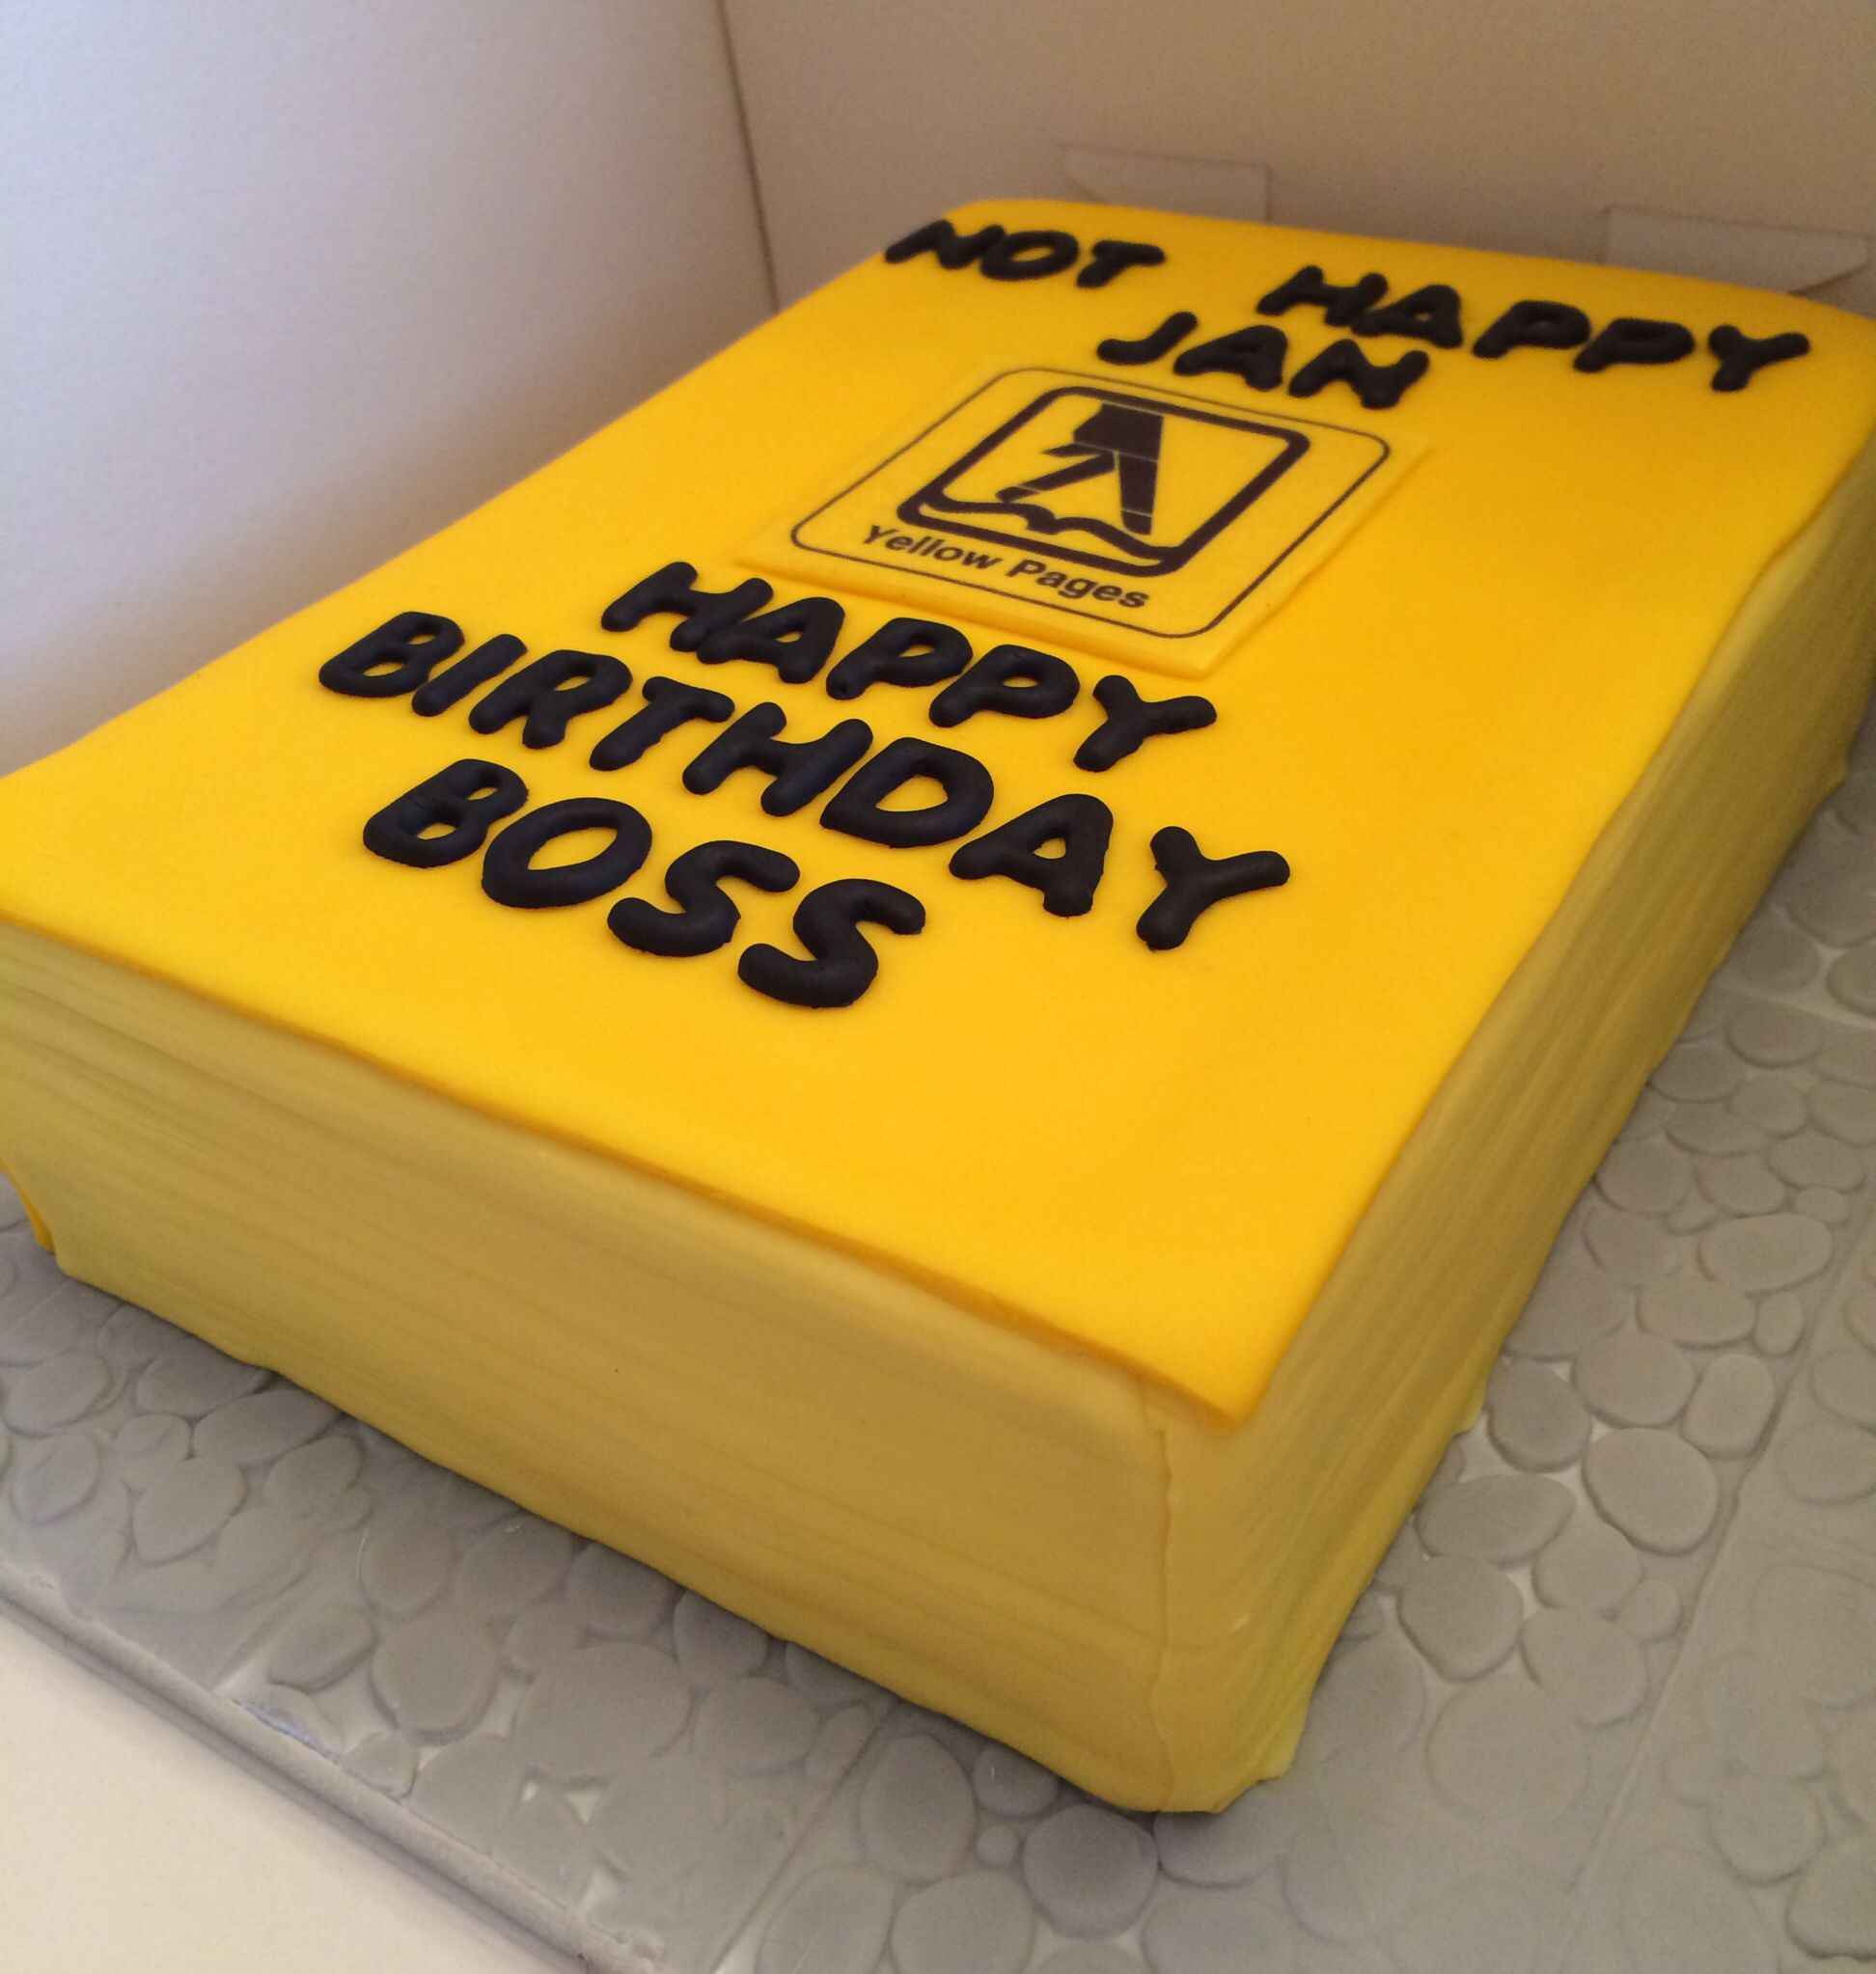 Yellow pages phone book birthday cake | Cakes made by Diane Wilks ...